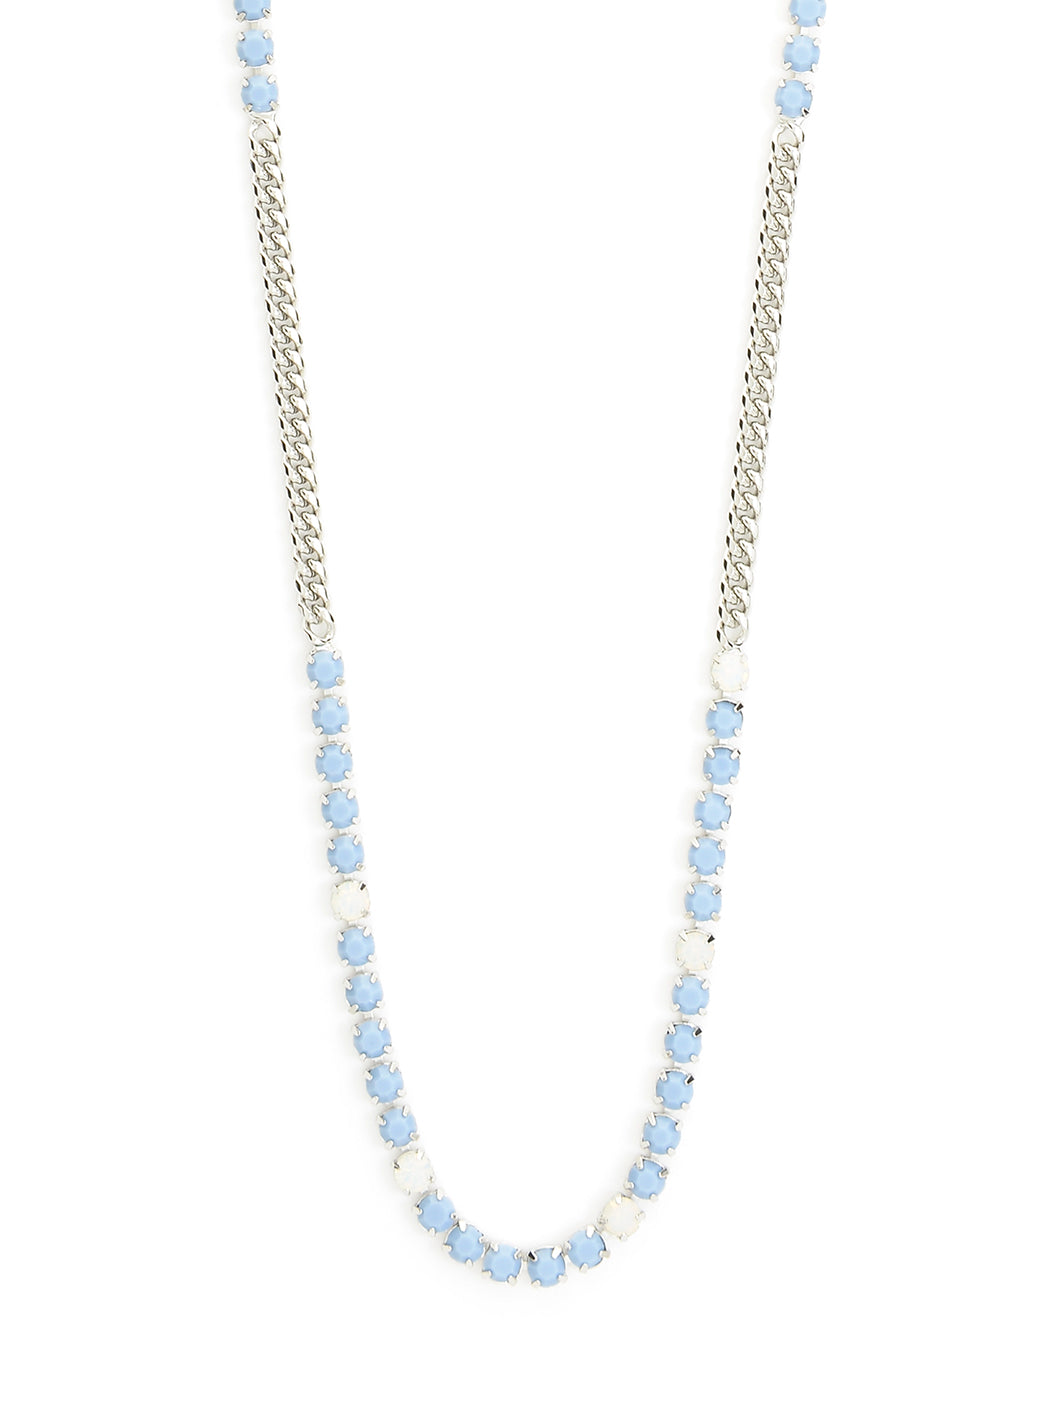 Silver and Pastel Necklace - 2 colors